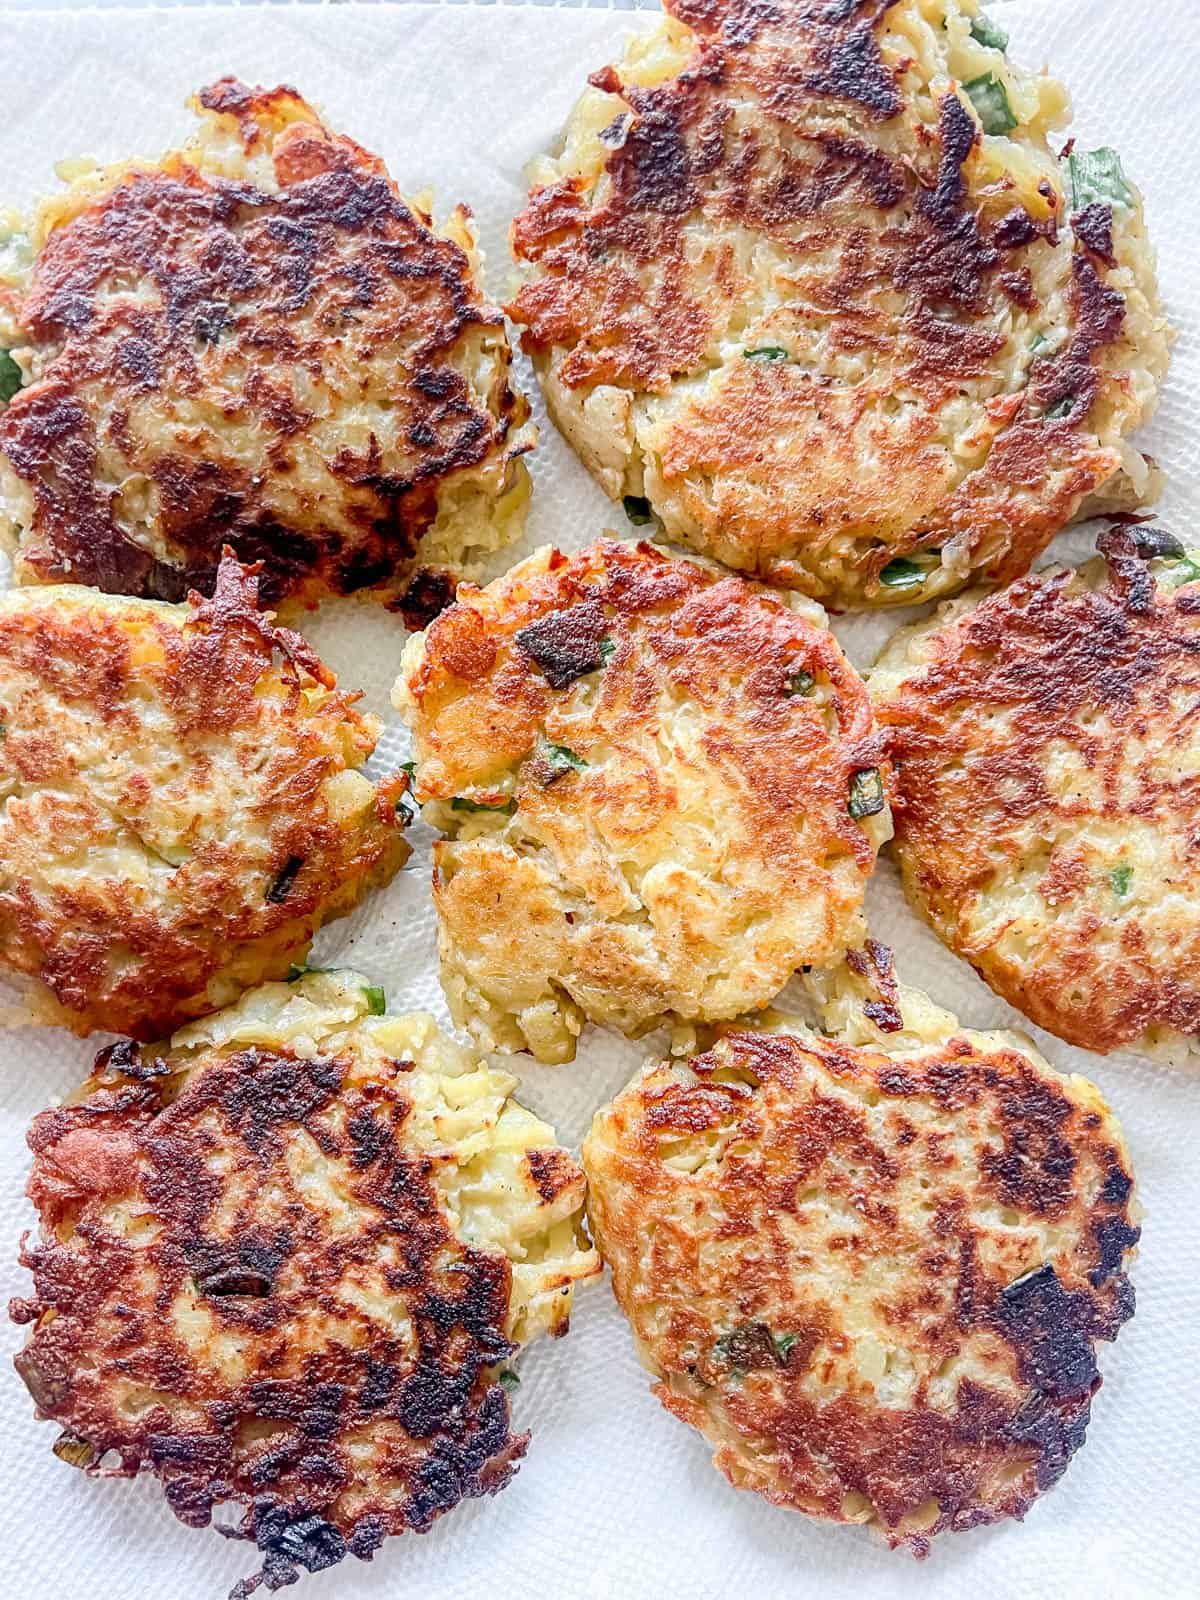 Cooked healthy potato pancakes on a paper towel.